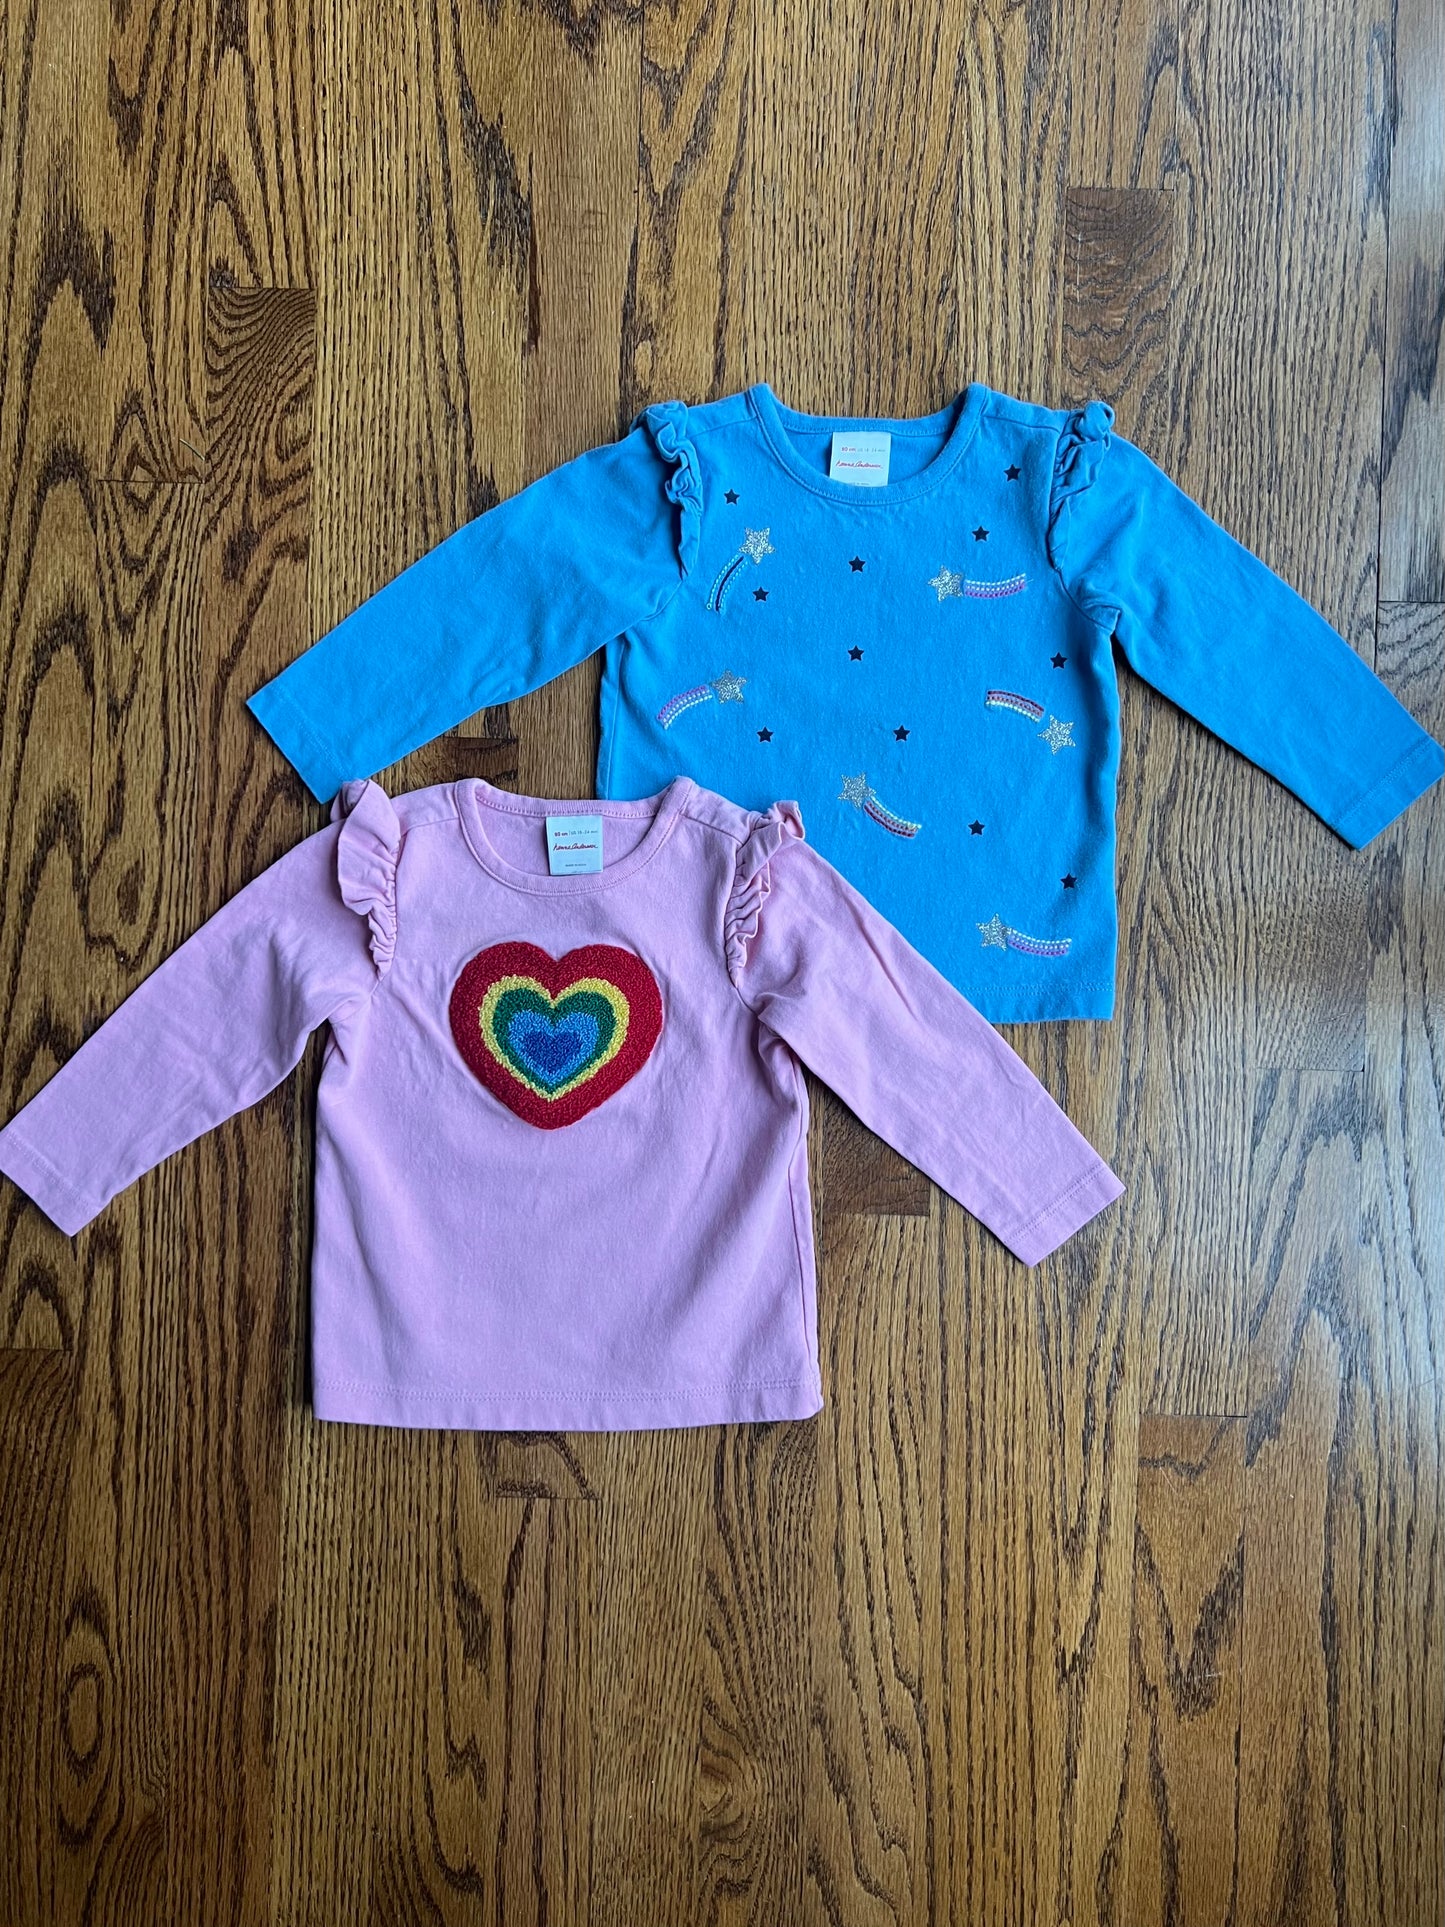 Hanna Andersson Baby Girl Size 80 cm / 18-24M Shirt Bundle, Pink & Blue